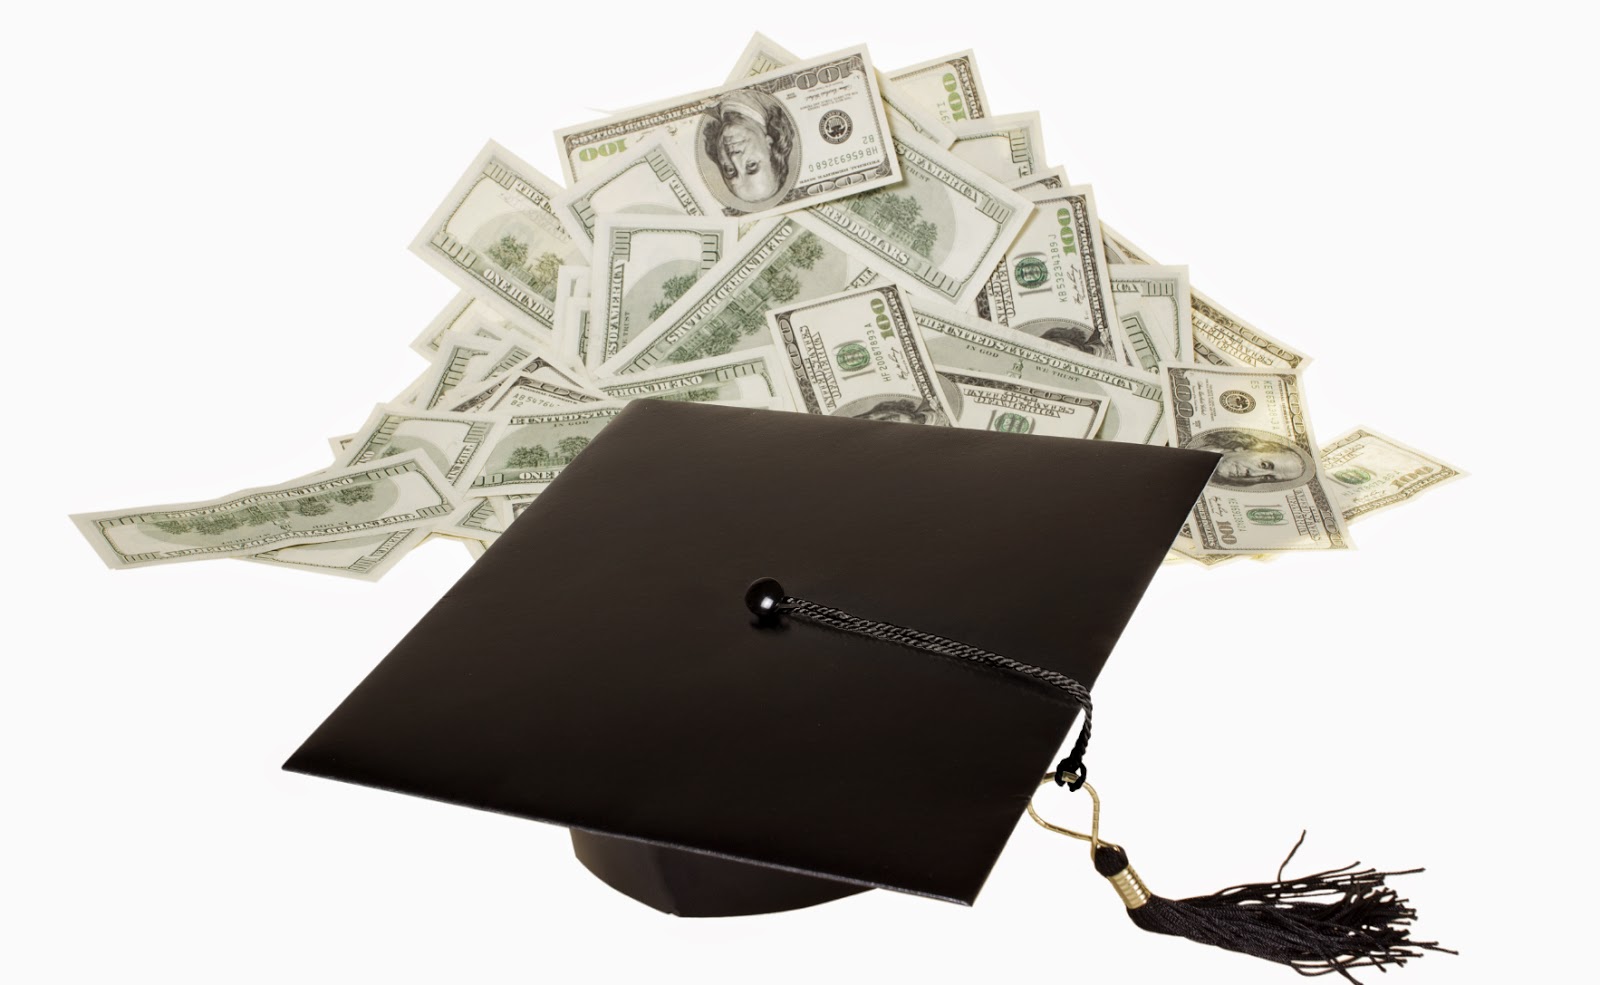 American Investment Planners LLC: Tips For Paying Back Student Loans